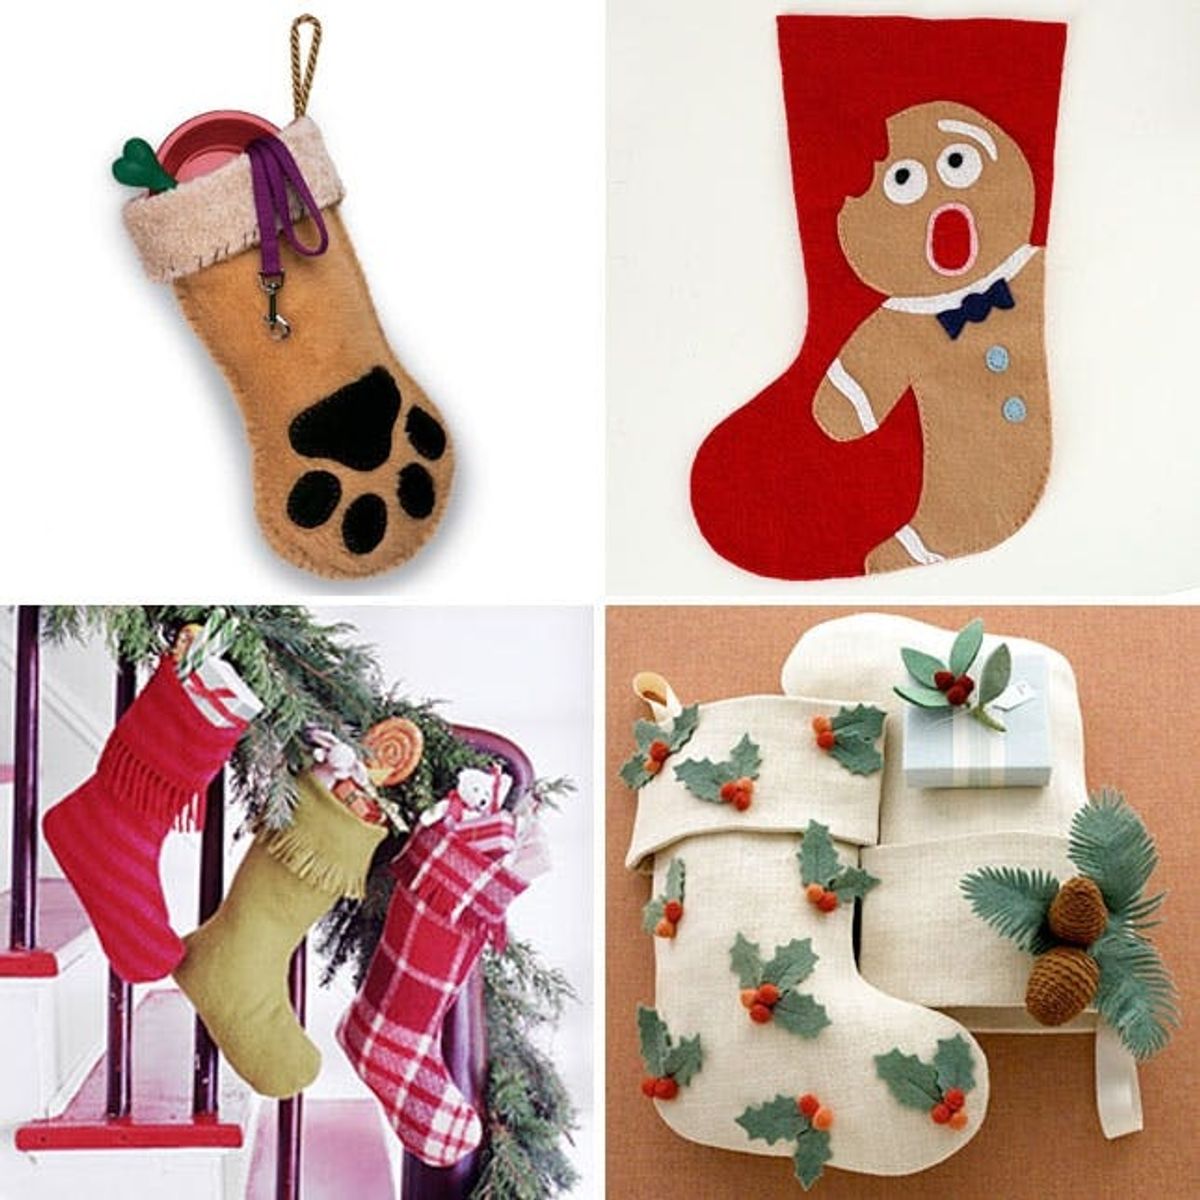 20 Ways to Make Your Own Holiday Stockings